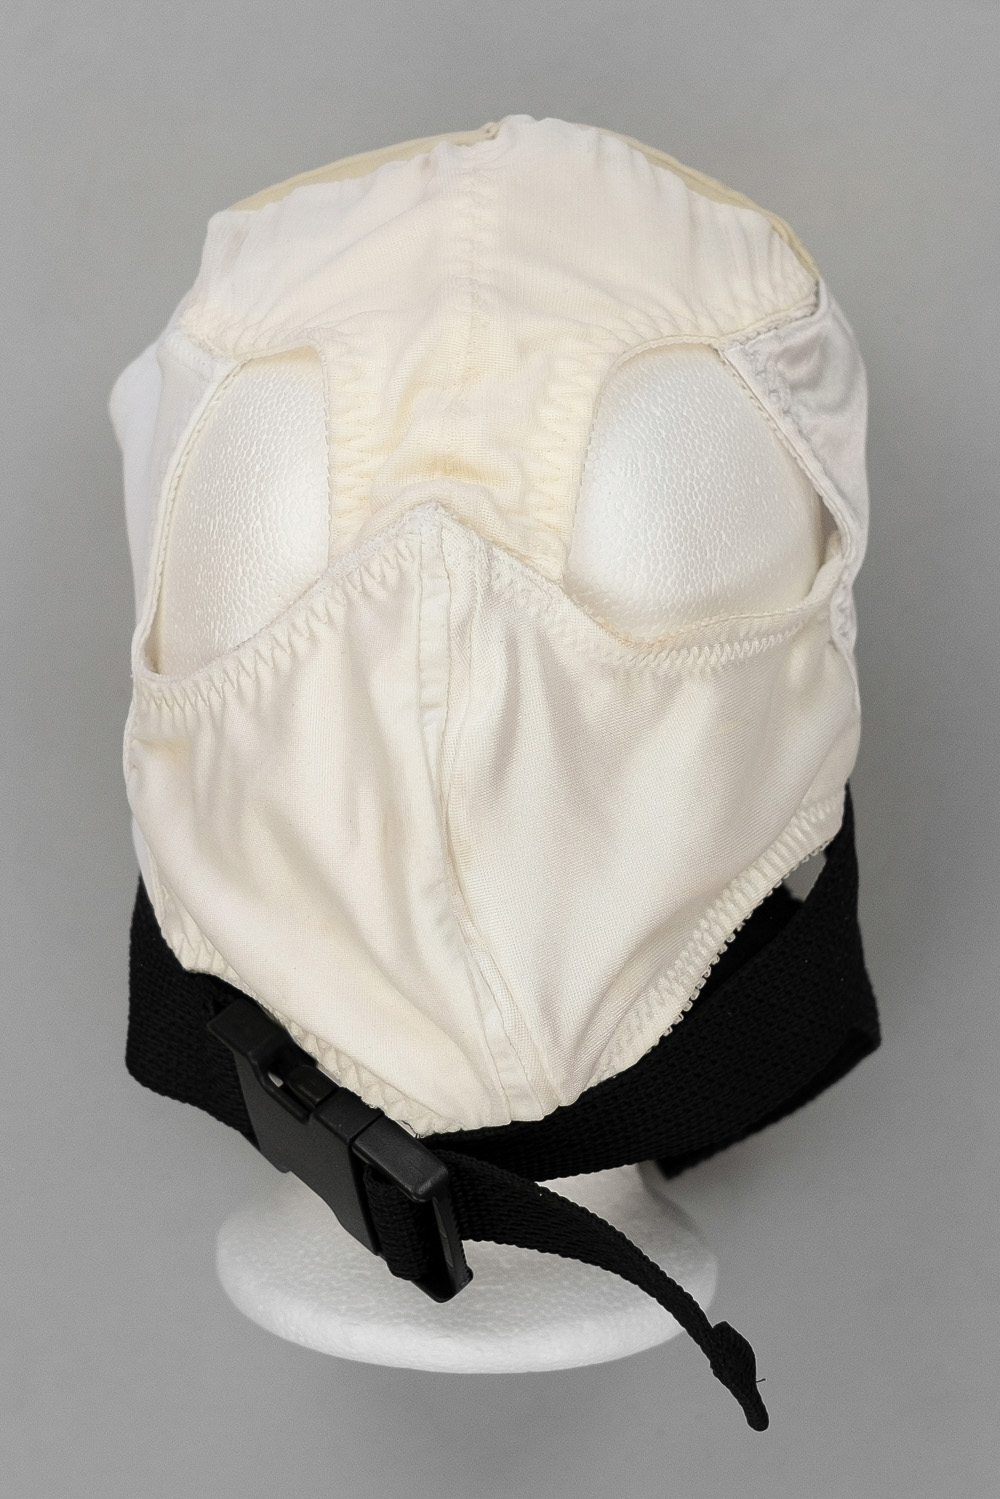 Gusset Mask in Black and White 14